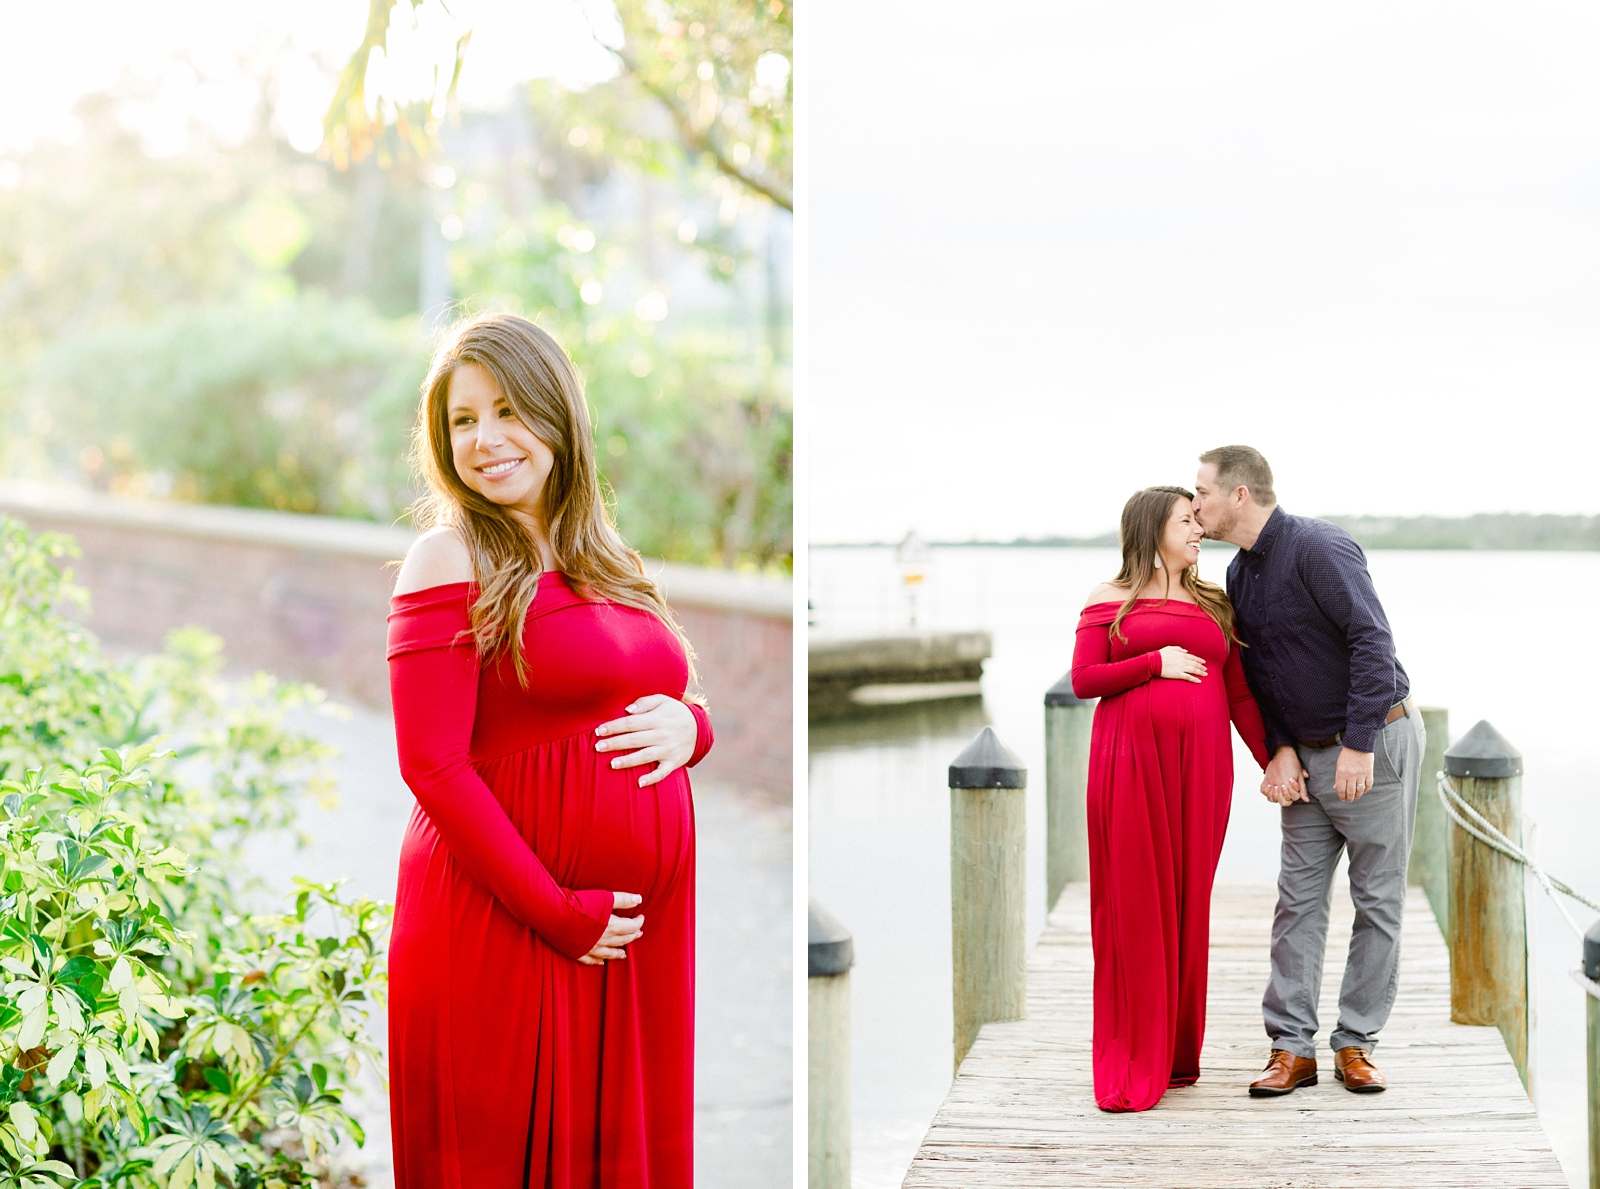 Tampa Maternity | © Ailyn La Torre Photography 2017